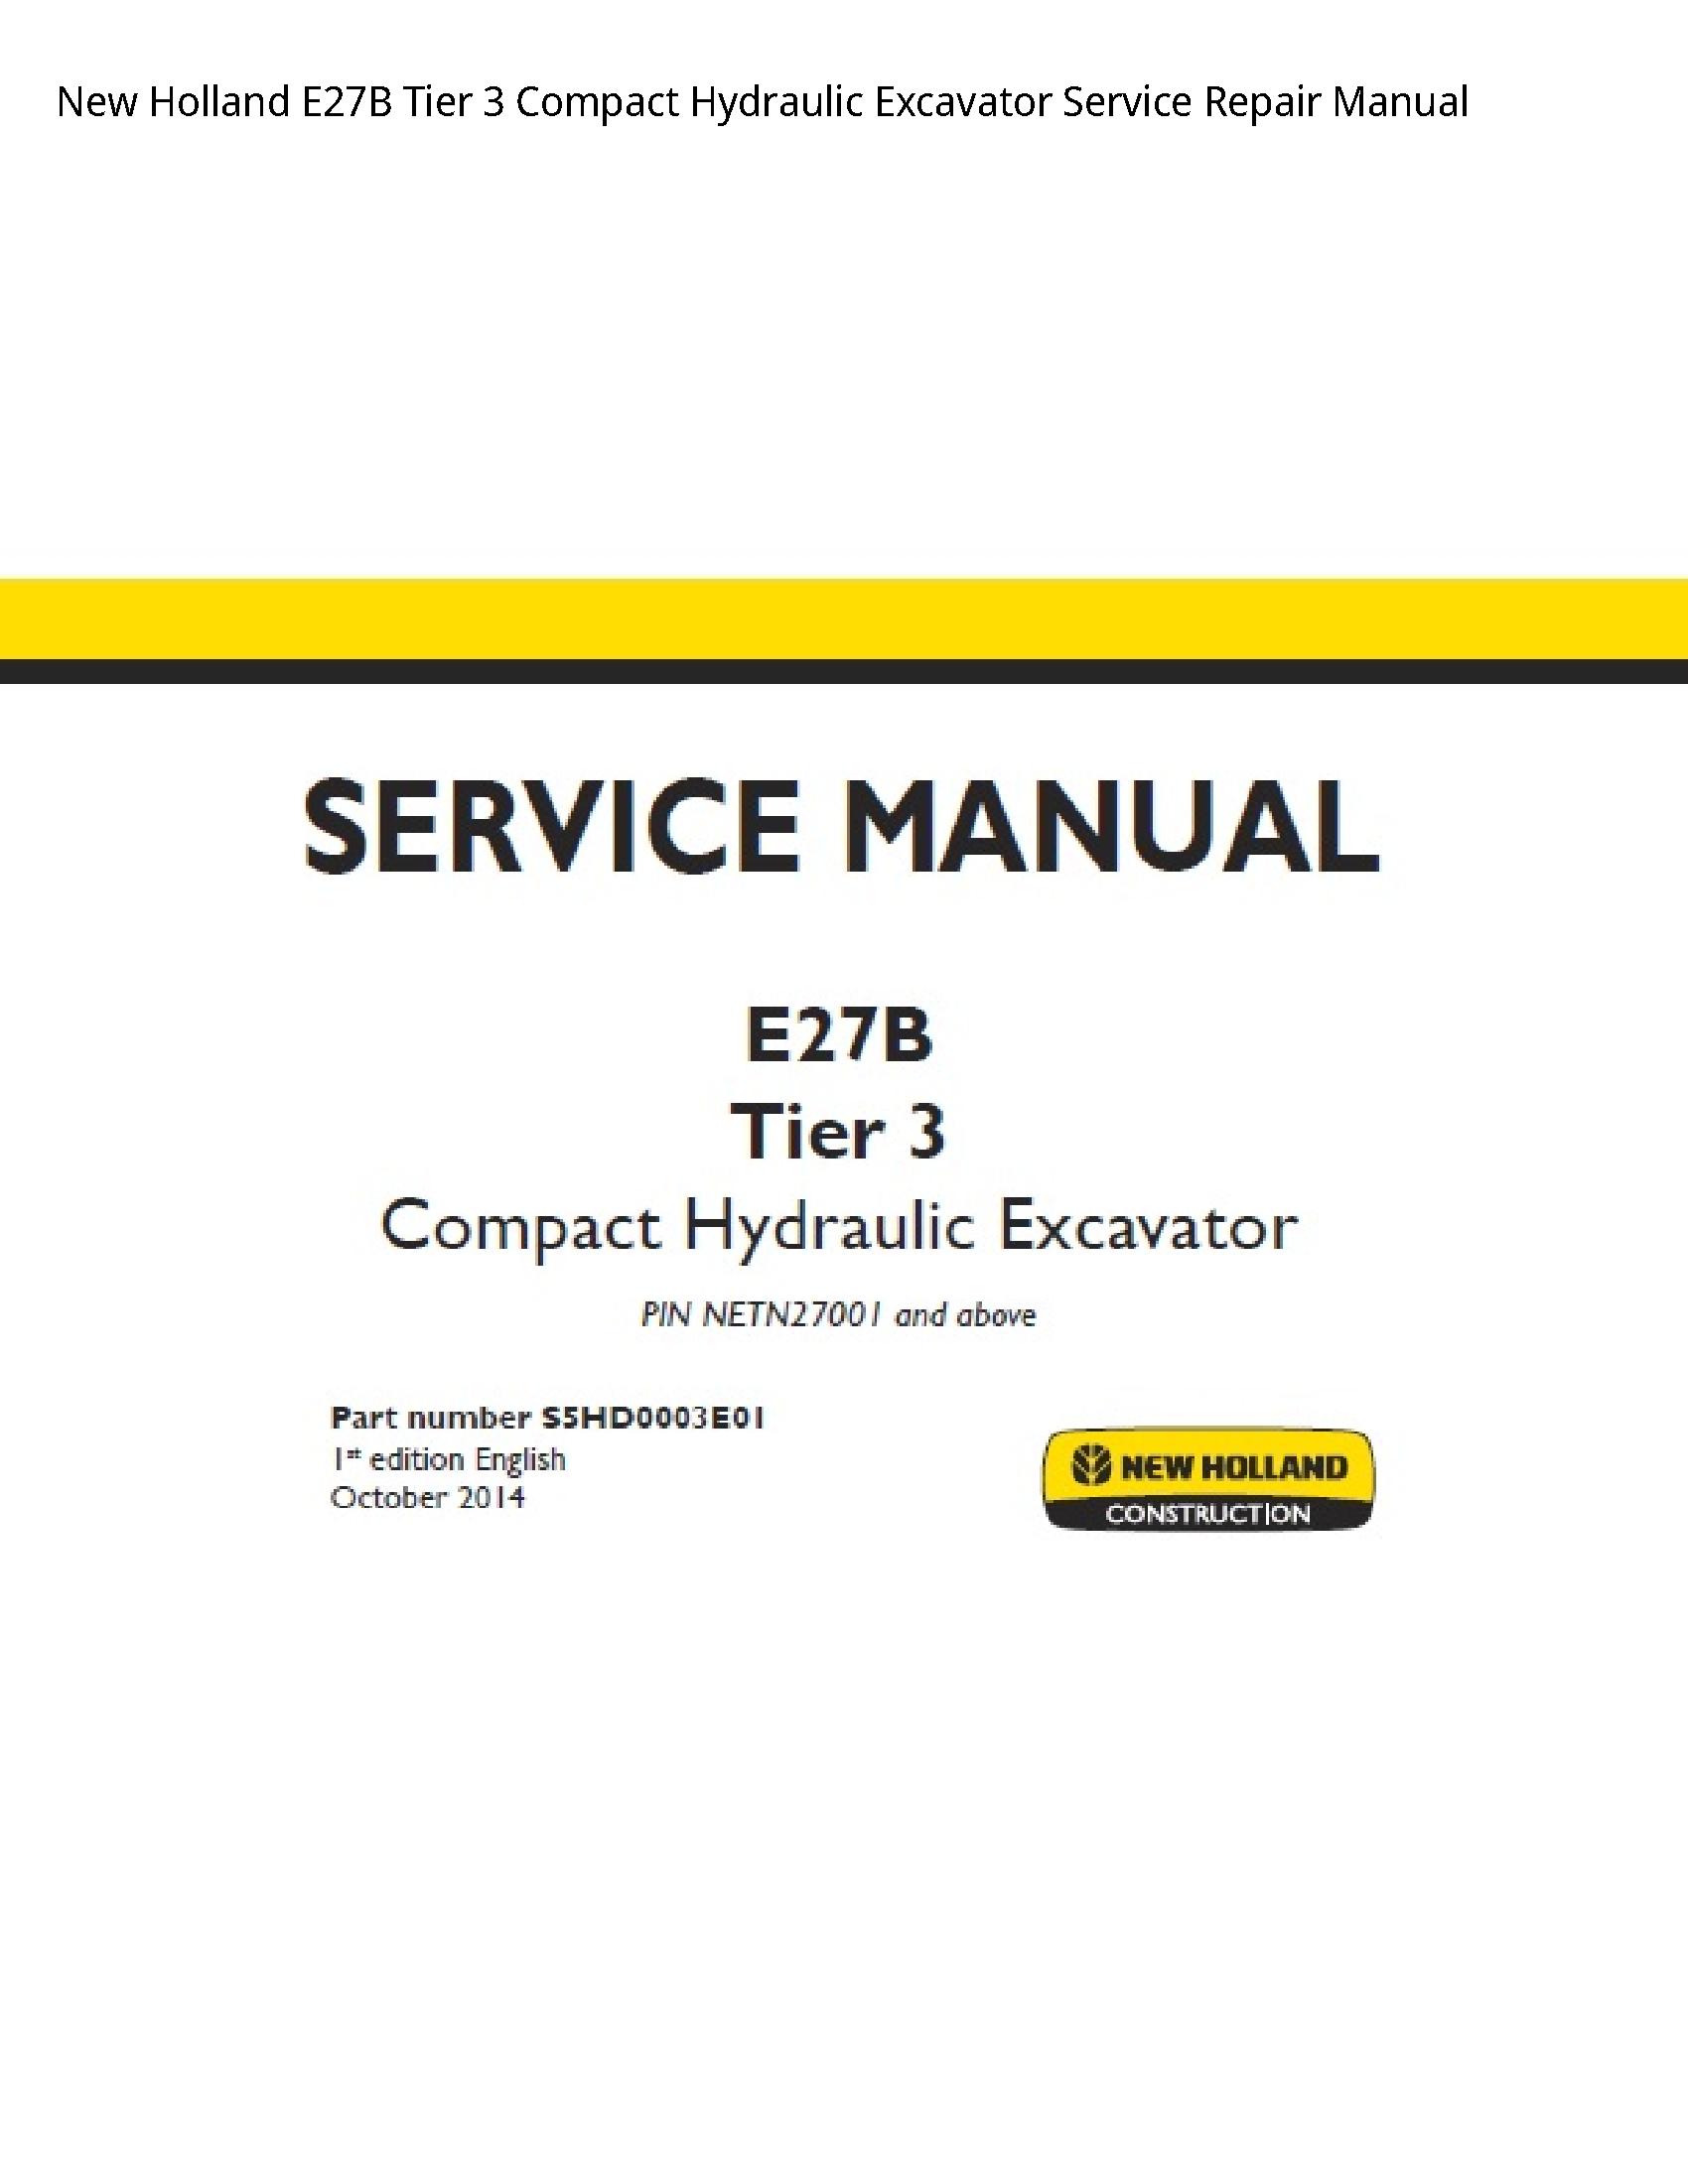 New Holland E27B Tier Compact Hydraulic Excavator manual